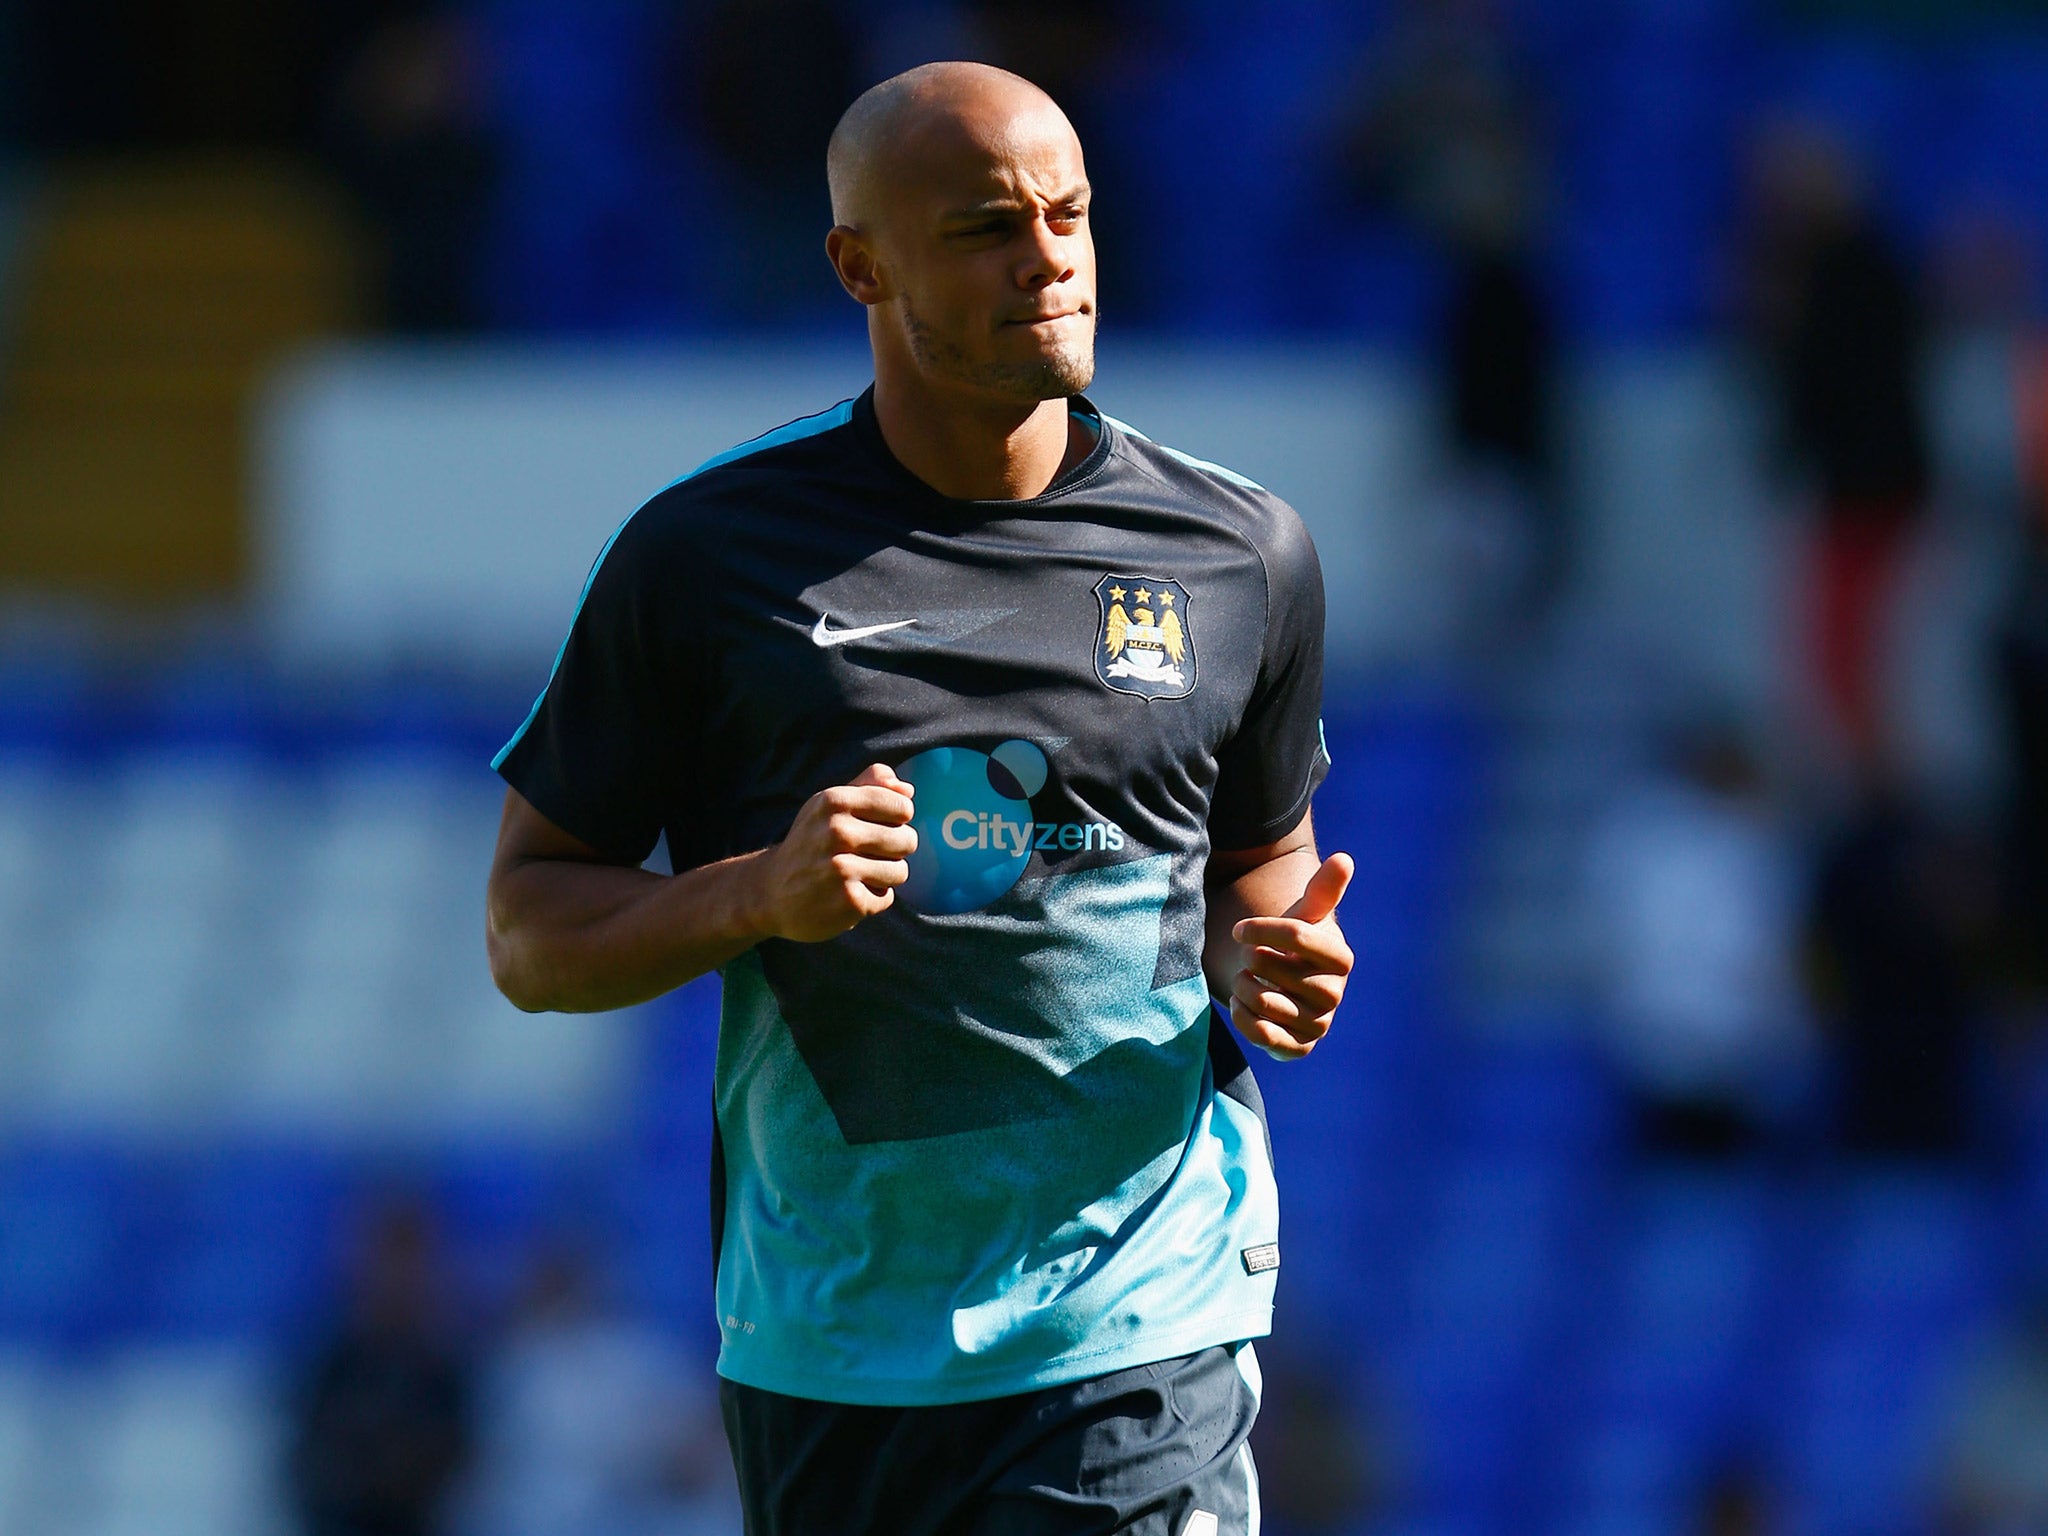 Kompany injured his calf in the warm-up prior to the Tottenham defeat